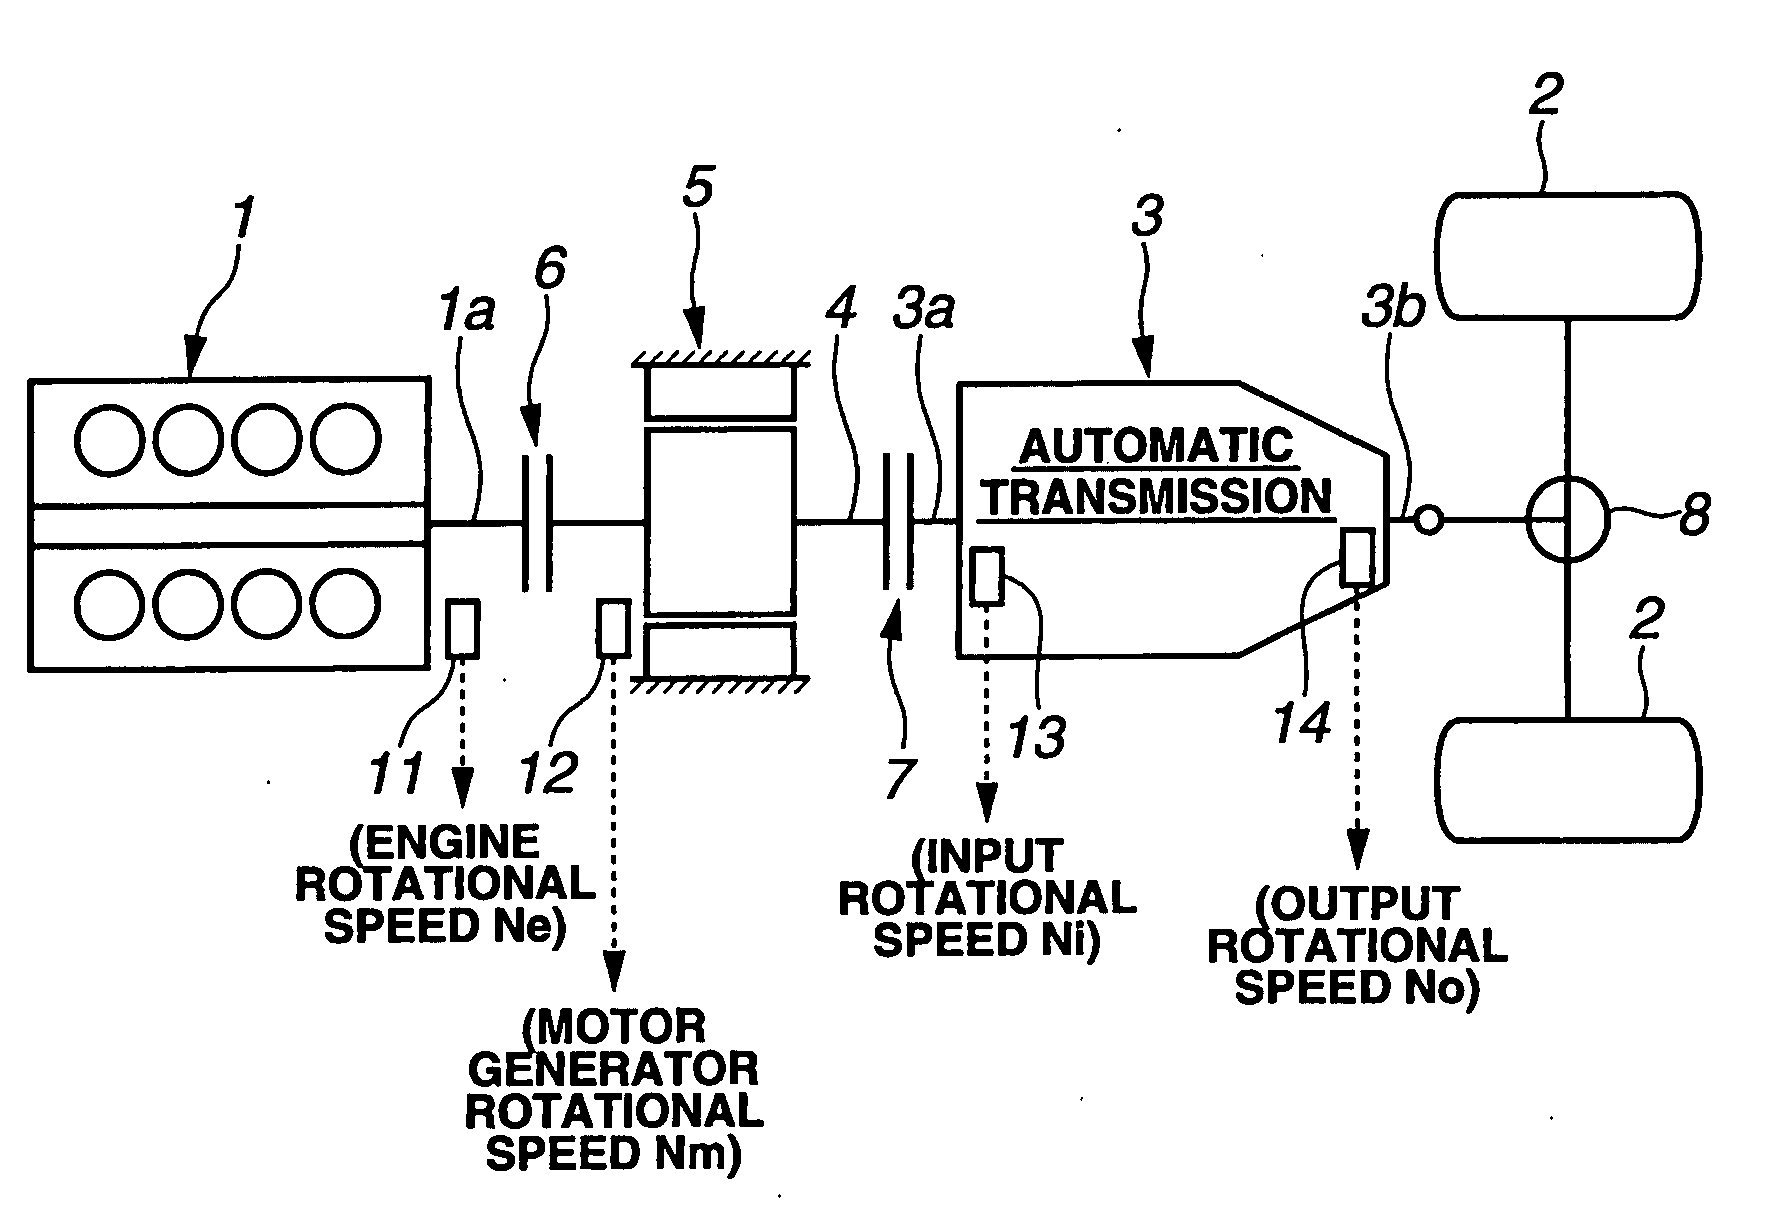 Drive state shift control apparatus for hybrid vehicle